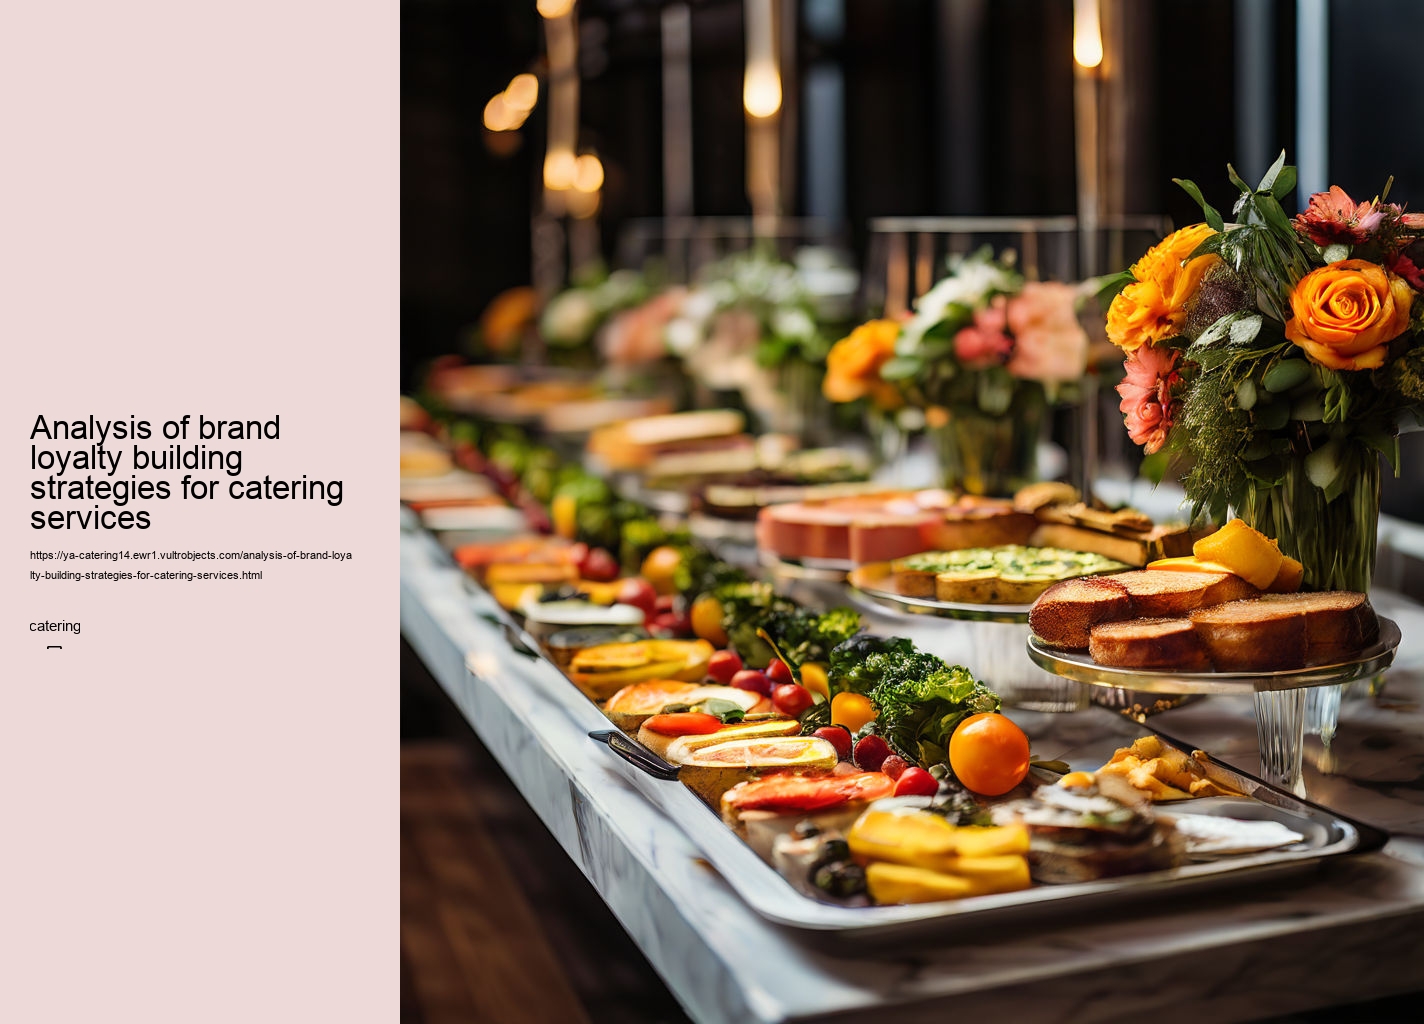 Analysis of brand loyalty building strategies for catering services